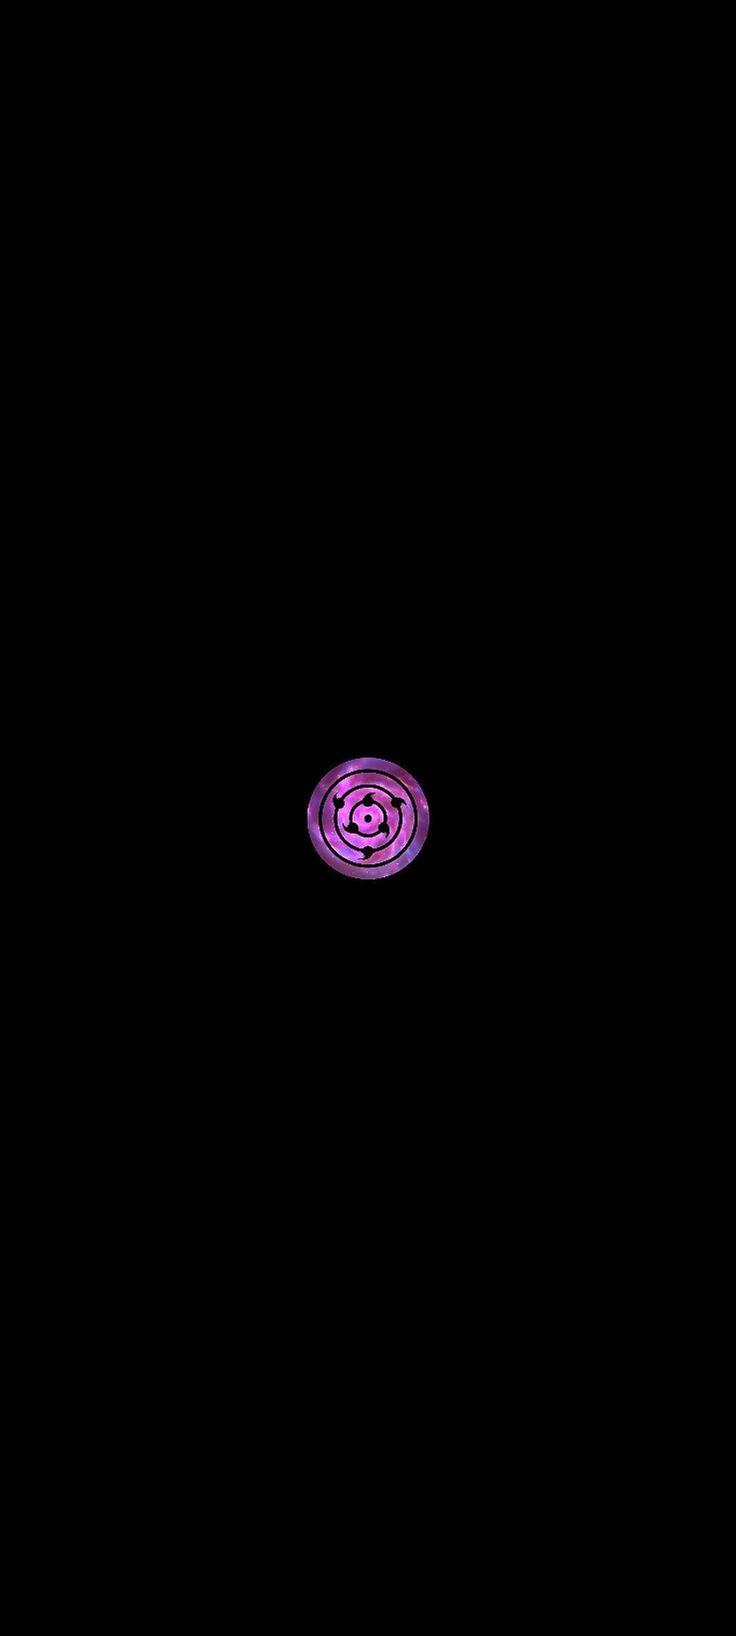 Wallpaper Of The Rinnegan Purple Evolved From Naruto For Mobile